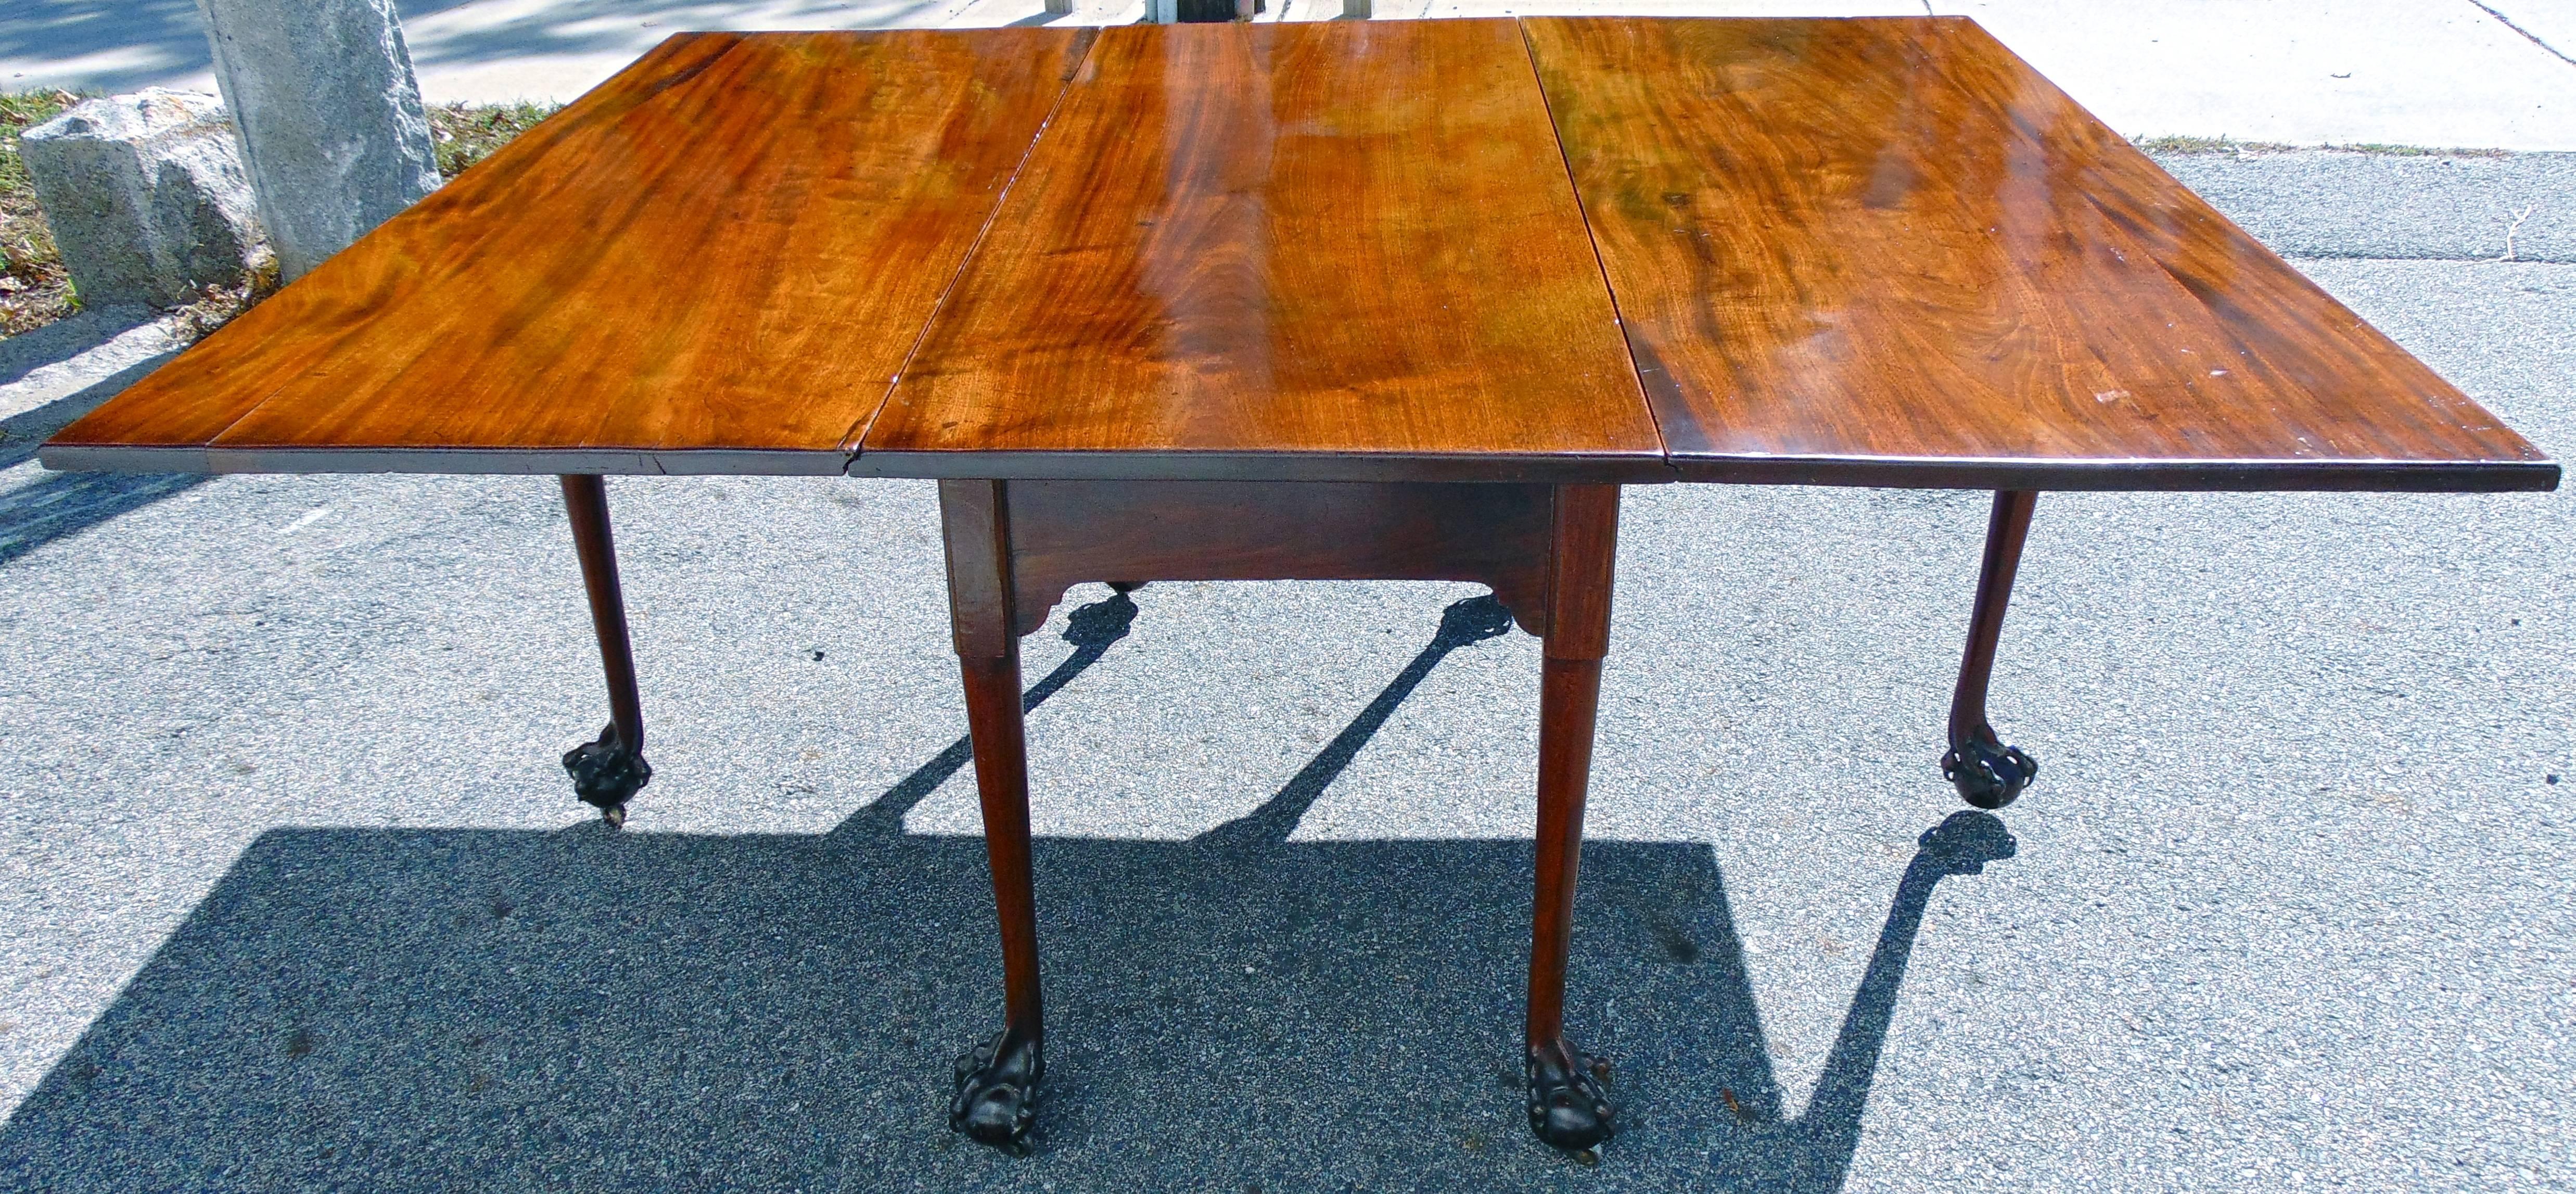 Beautifully constructed and period Georgian Chippendale drop-leaf table.

Rare reticulated claw and ball feet.
Original secondary supports which fold out in locking mechanism creating
a fully symmetrical structure.
More than ample size to fit